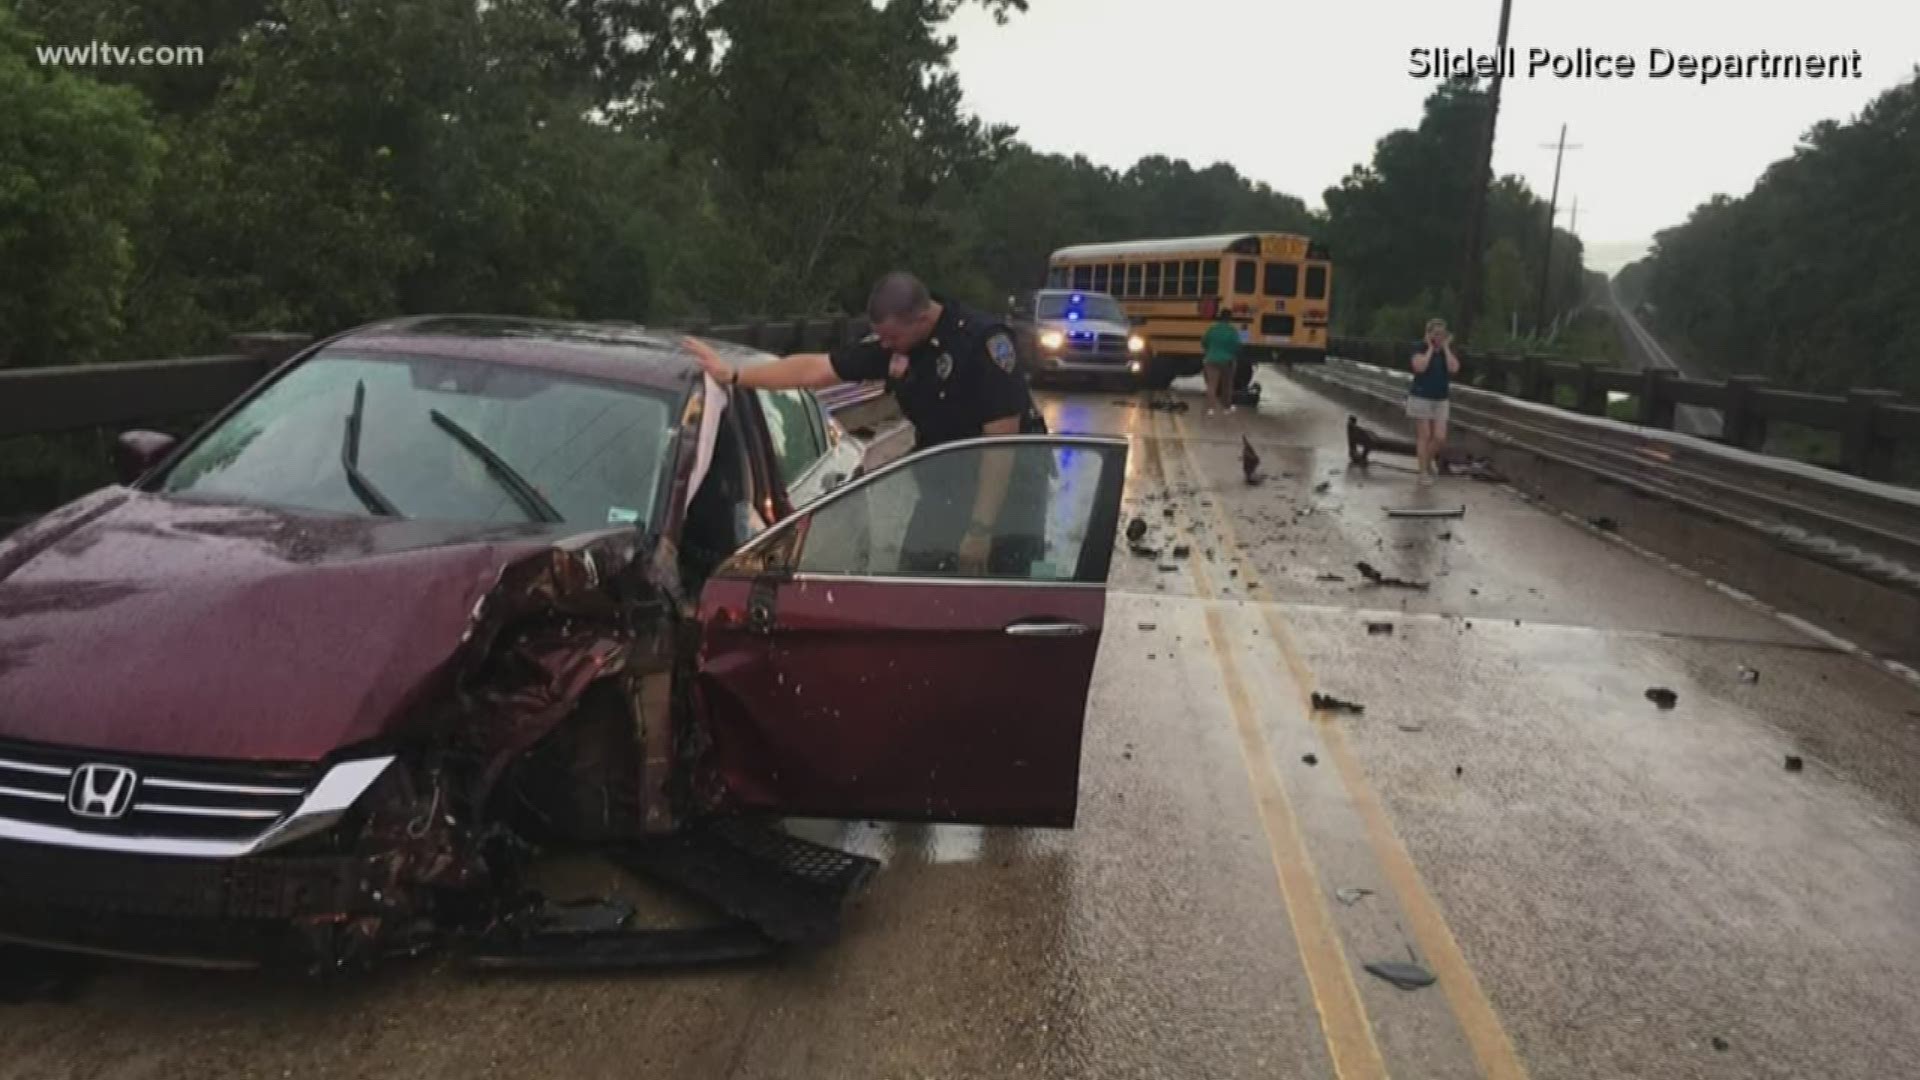 Alexandra Alley, 26, was driving on Highway 11 on Friday morning when she crossed over the center line and crashed head-on into a school bus, according to Slidell Police. The bus then spun out of control and crashed into an unmarked police vehicle.